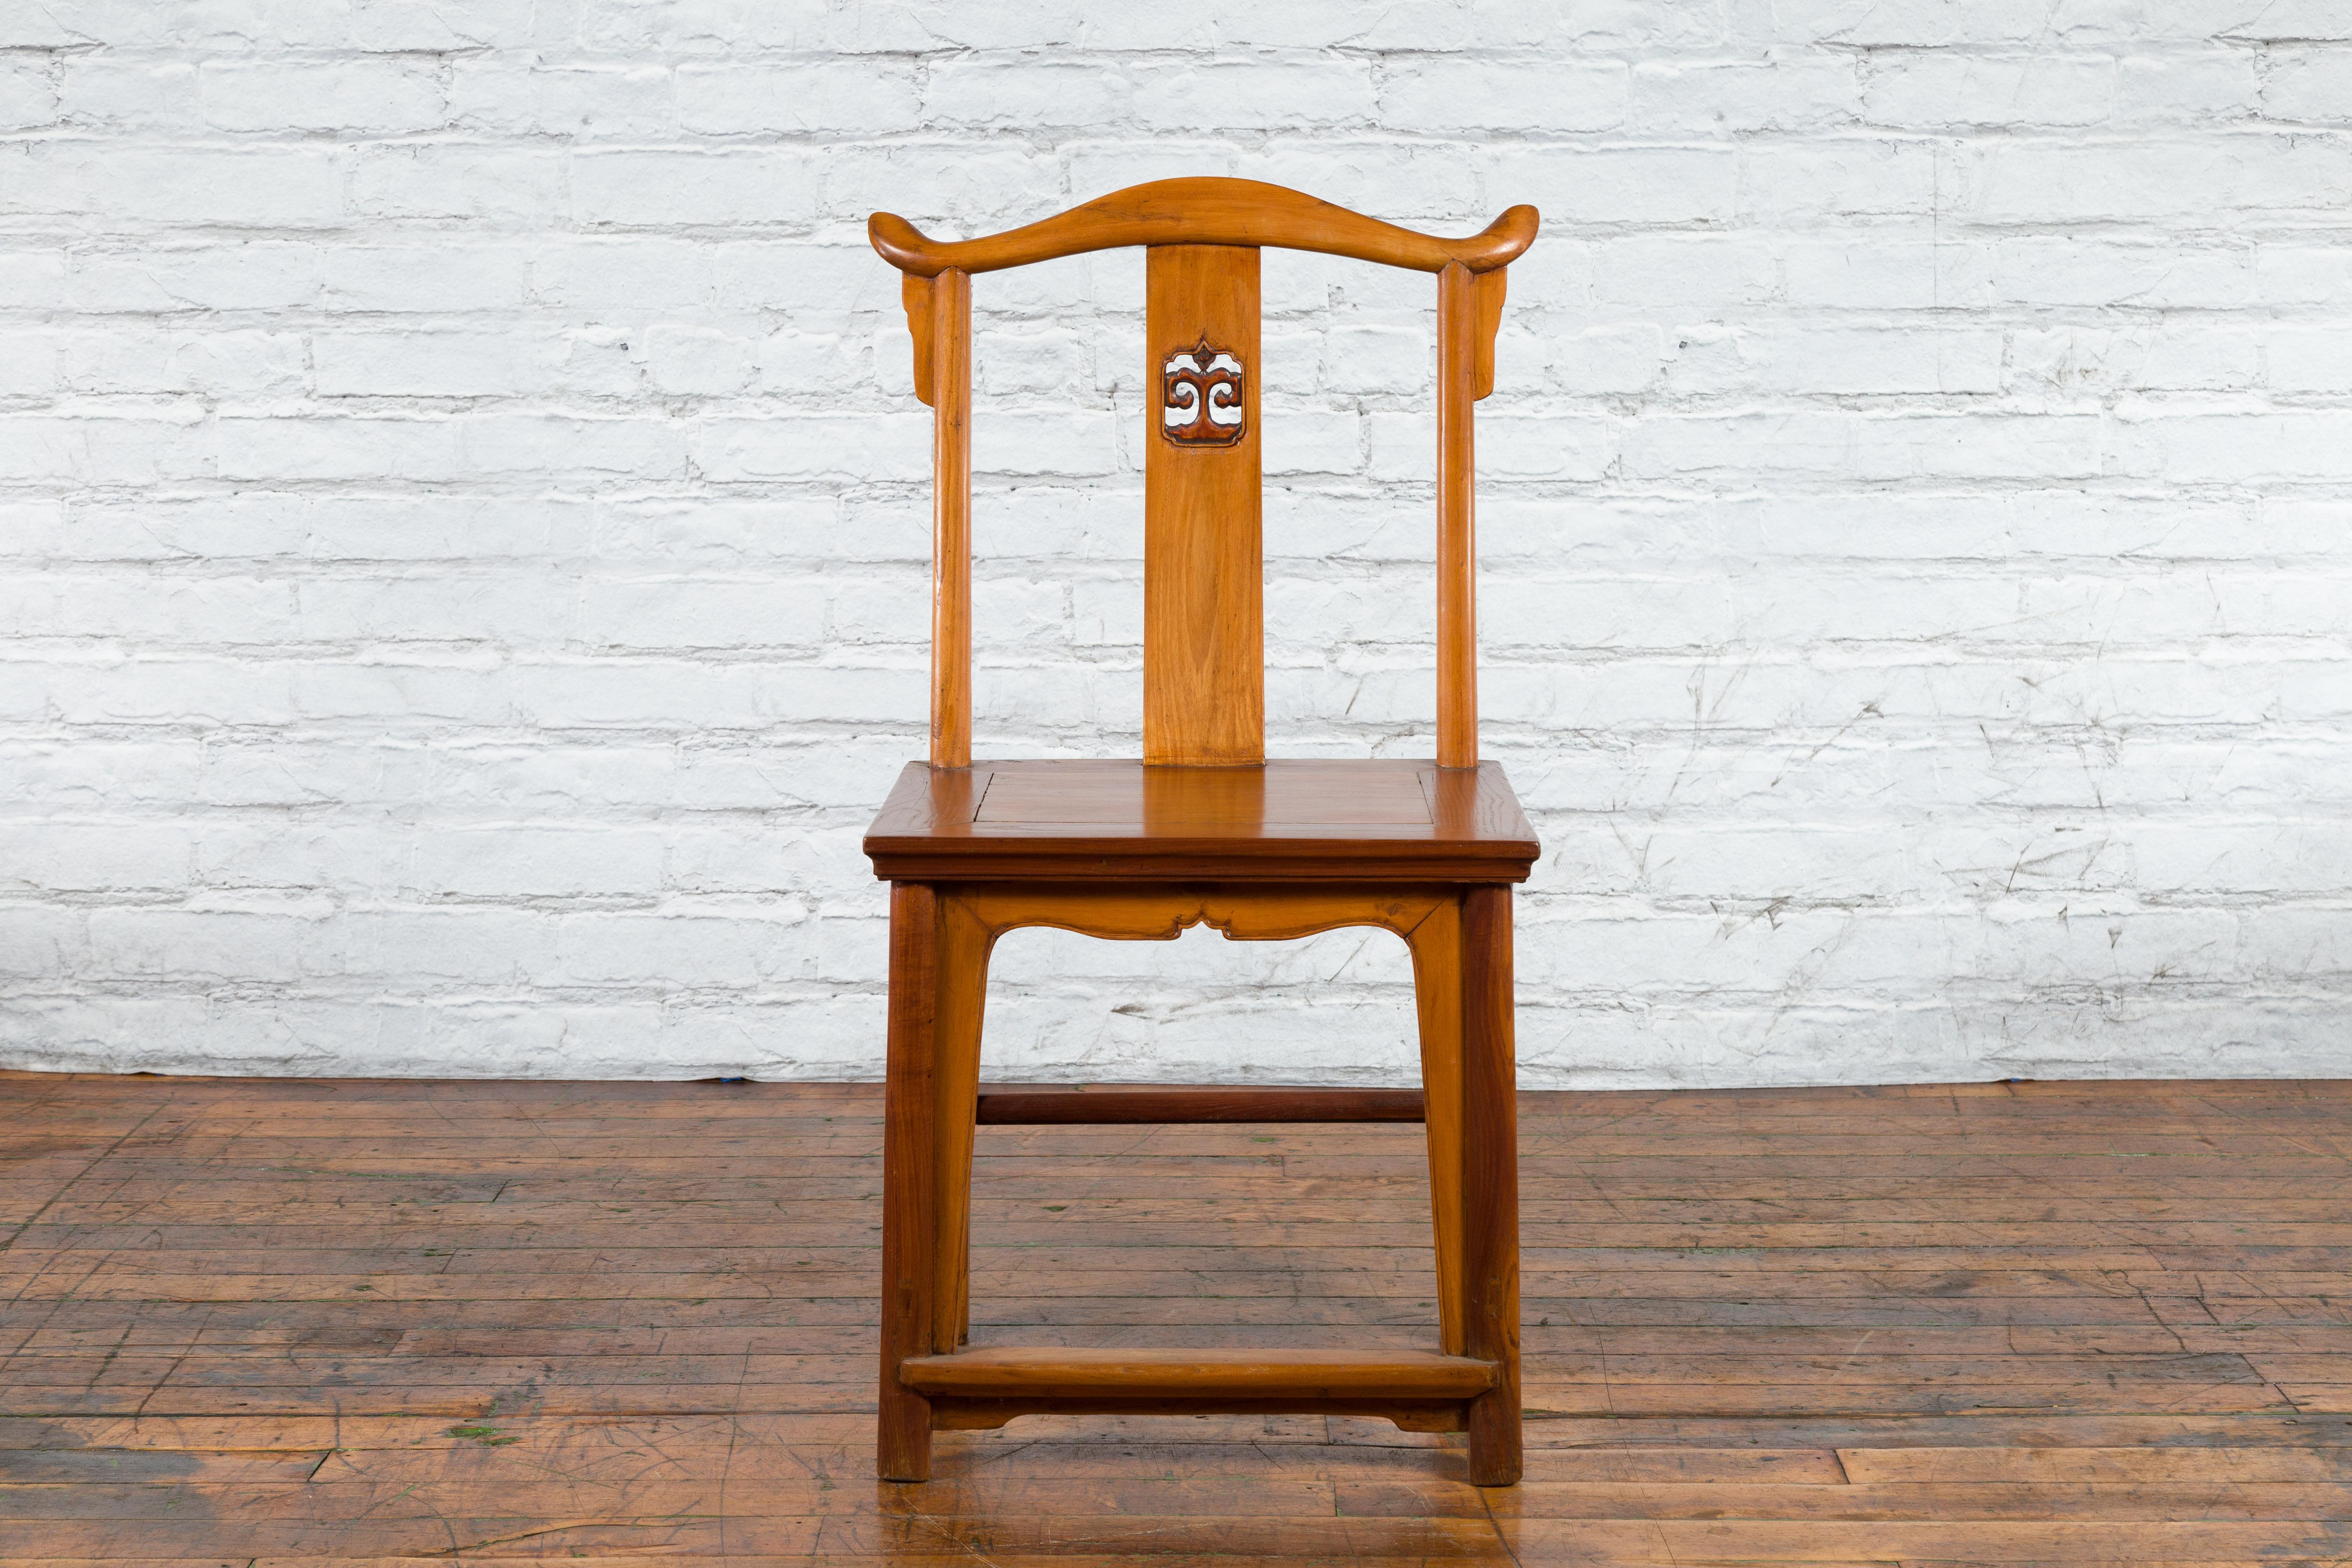 A Chinese Qing Dynasty period lamp hanger chair from the early 20th century, with hand-carved medallion on the back splat, two-toned finish and side stretchers. Created in China during the later part of the Qing dynasty period in the early 20th